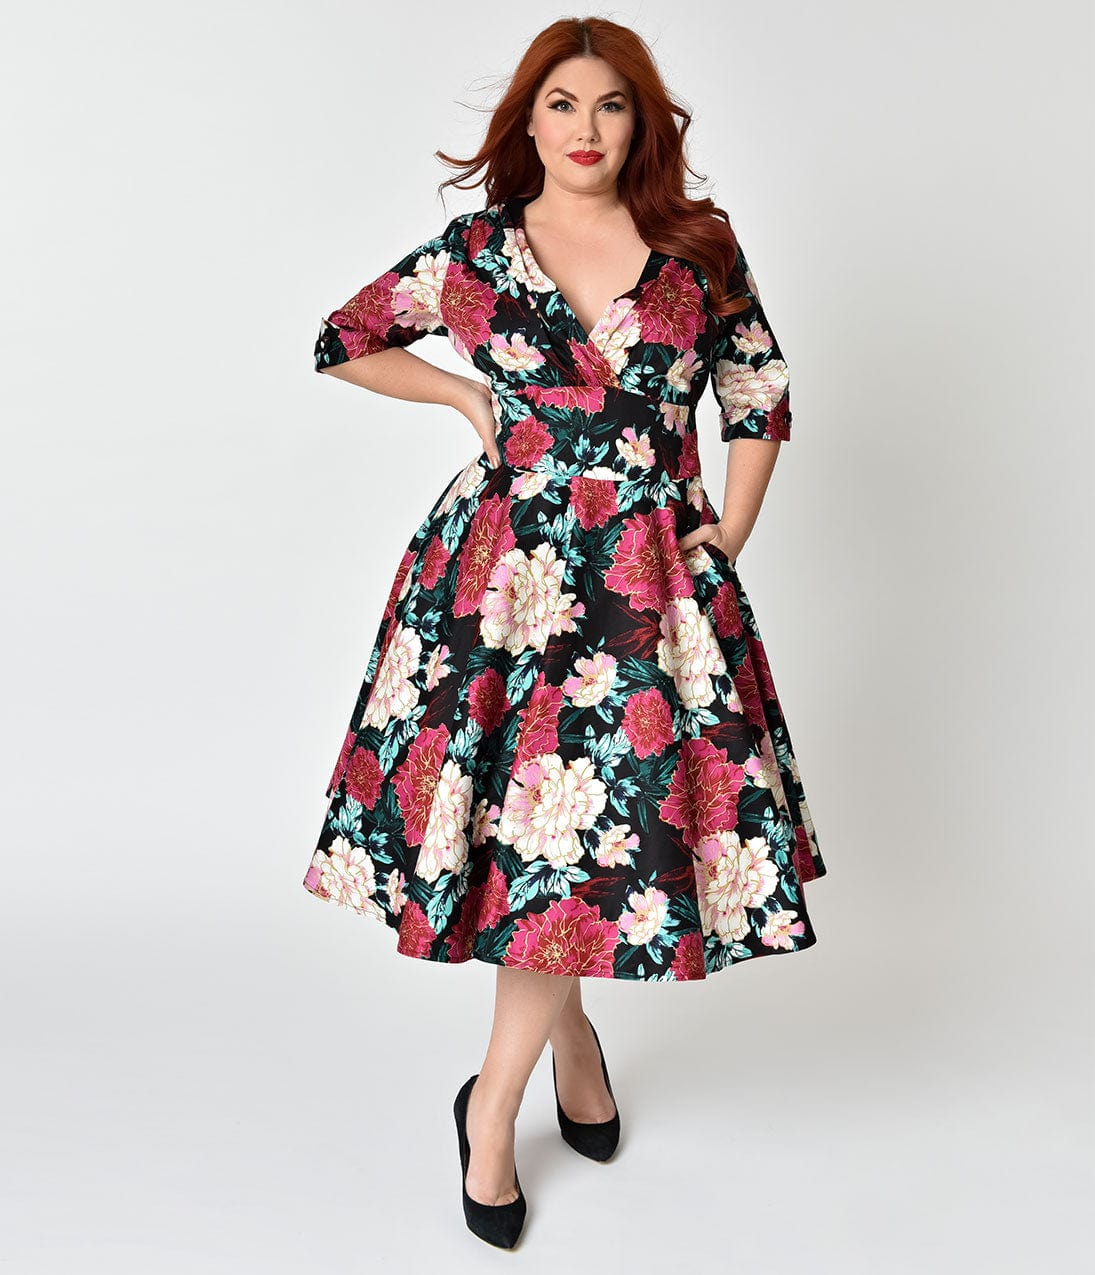 1950s Plus Size Dresses, Clothing and Costumes